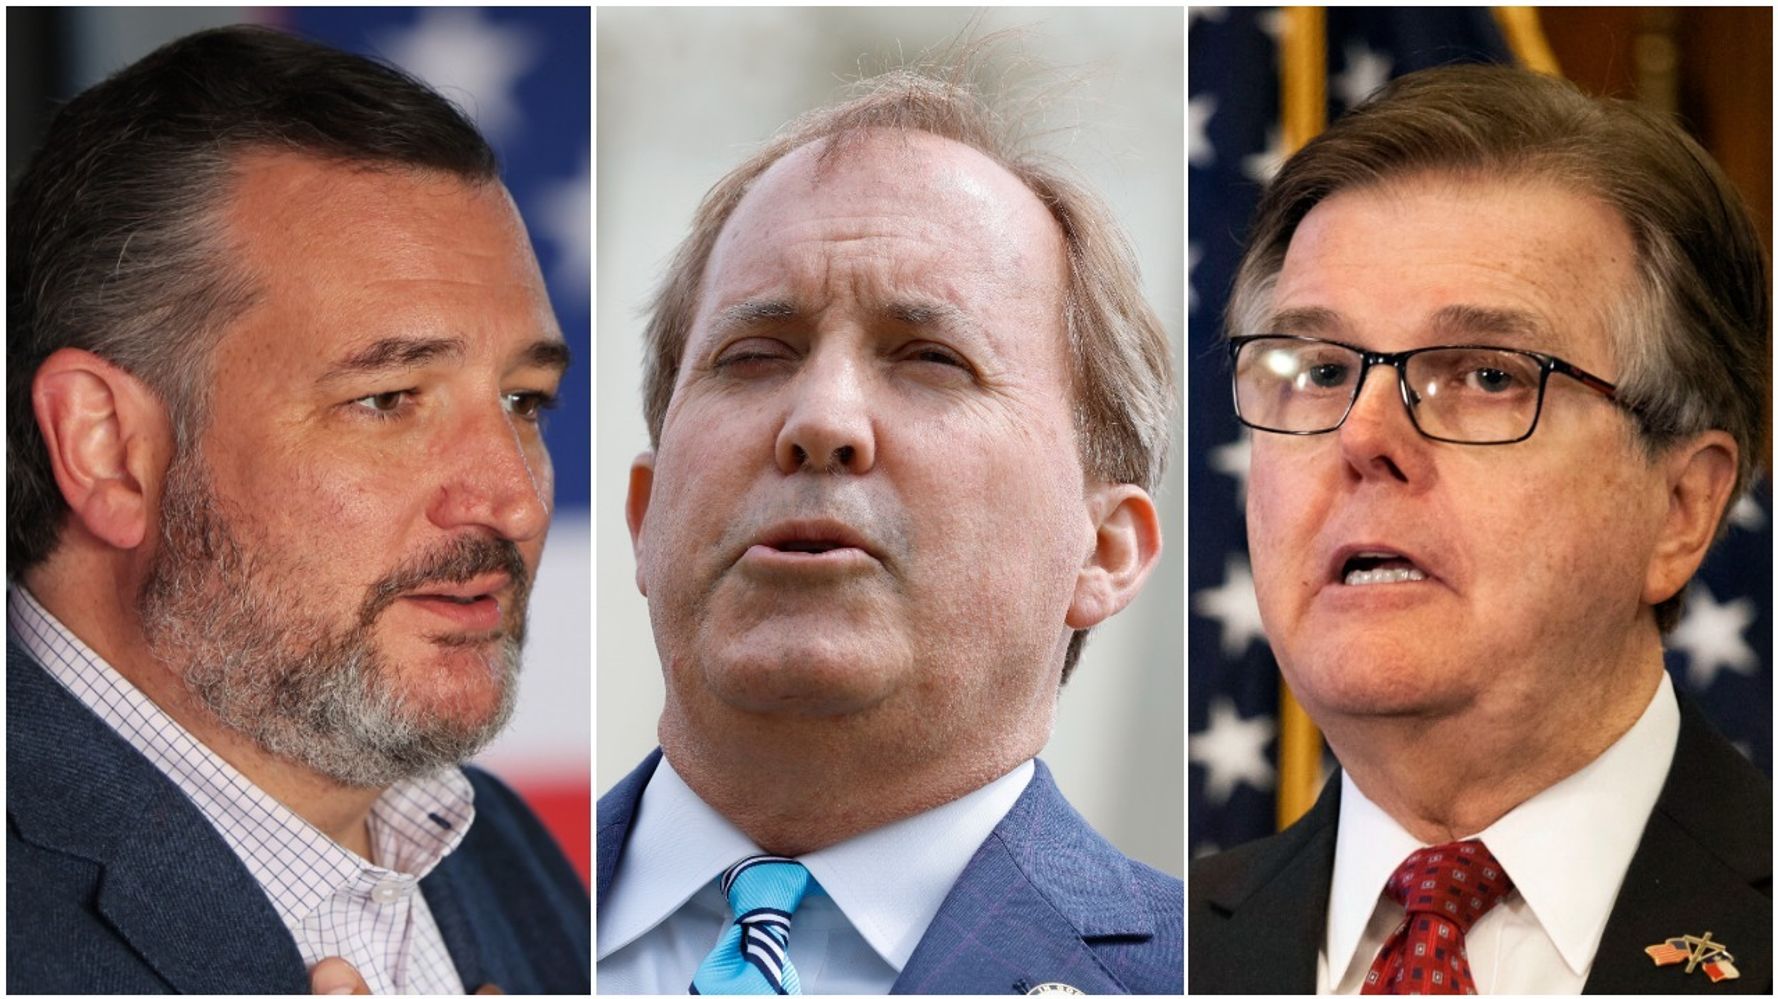 Top Texas Republicans Call For More Guns, Fortified Schools, Armed Teachers After Attack